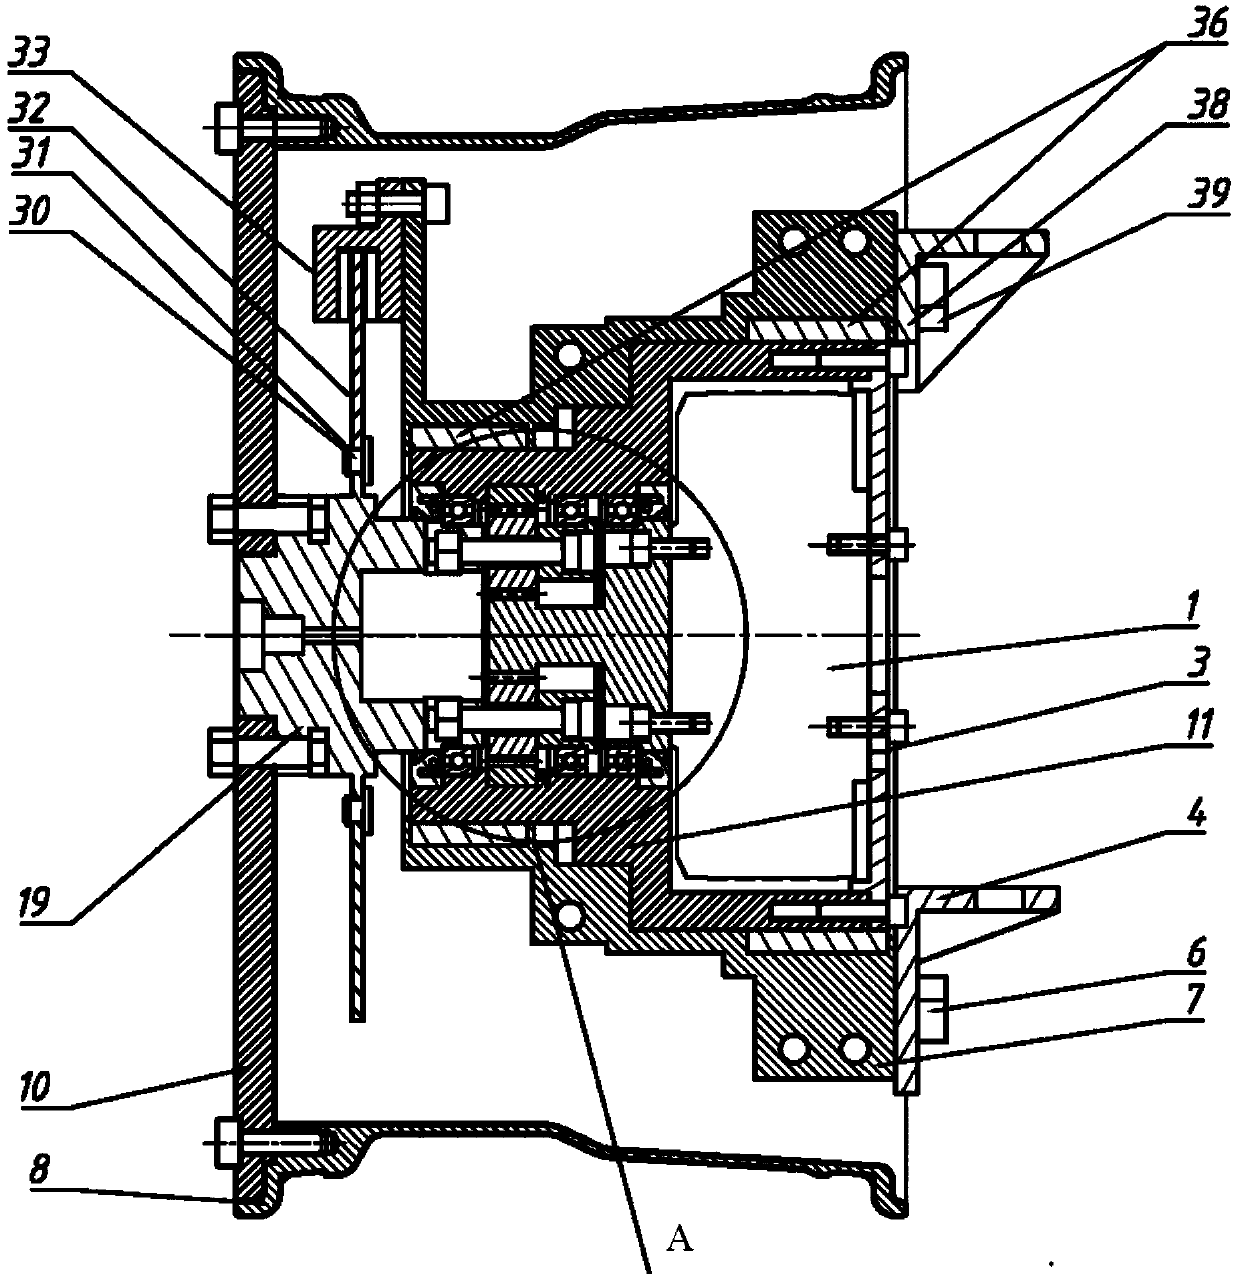 A power transmission integrated electric wheel